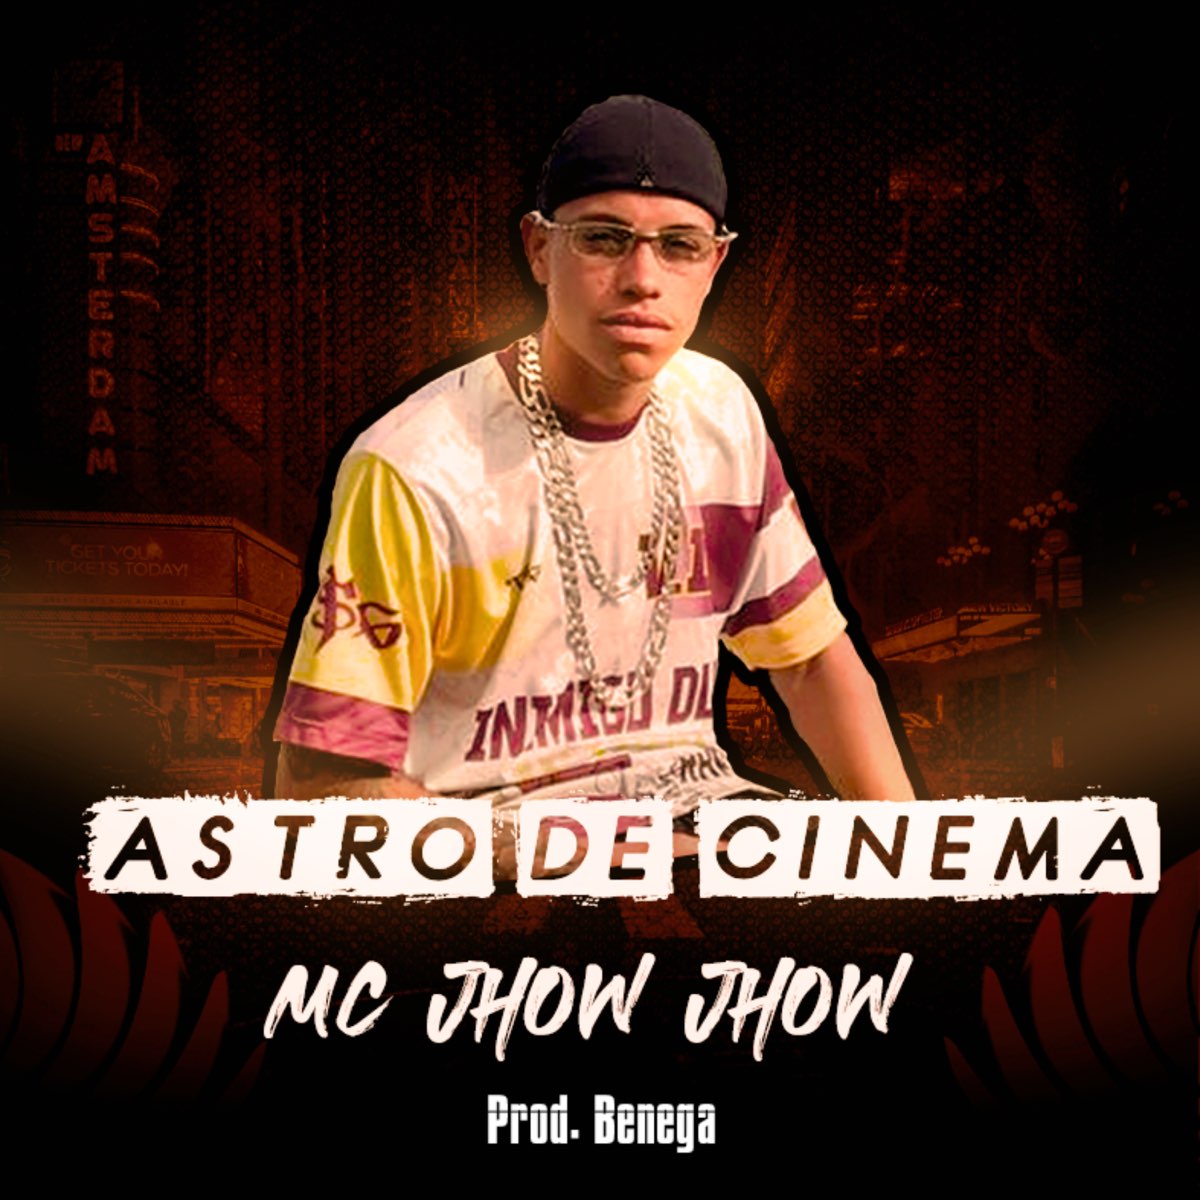 Astro de Cinema - Single by Jhow Jhow Jf on Apple Music